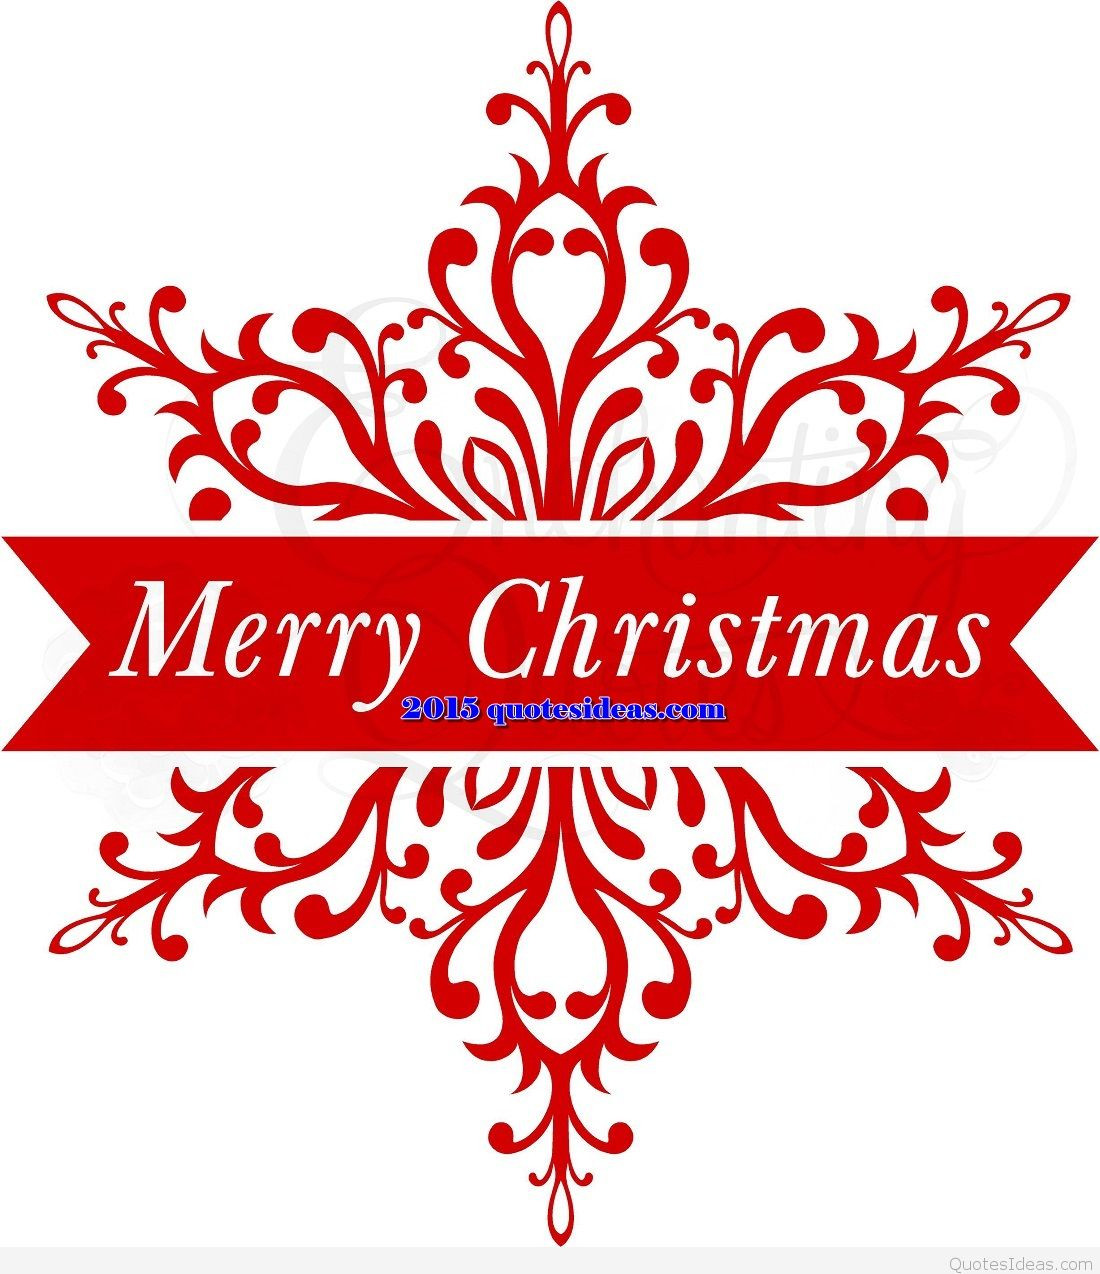 Happy Christmas Quotes
 Merry Christmas wishes to all 2015 2016 sayings quotes